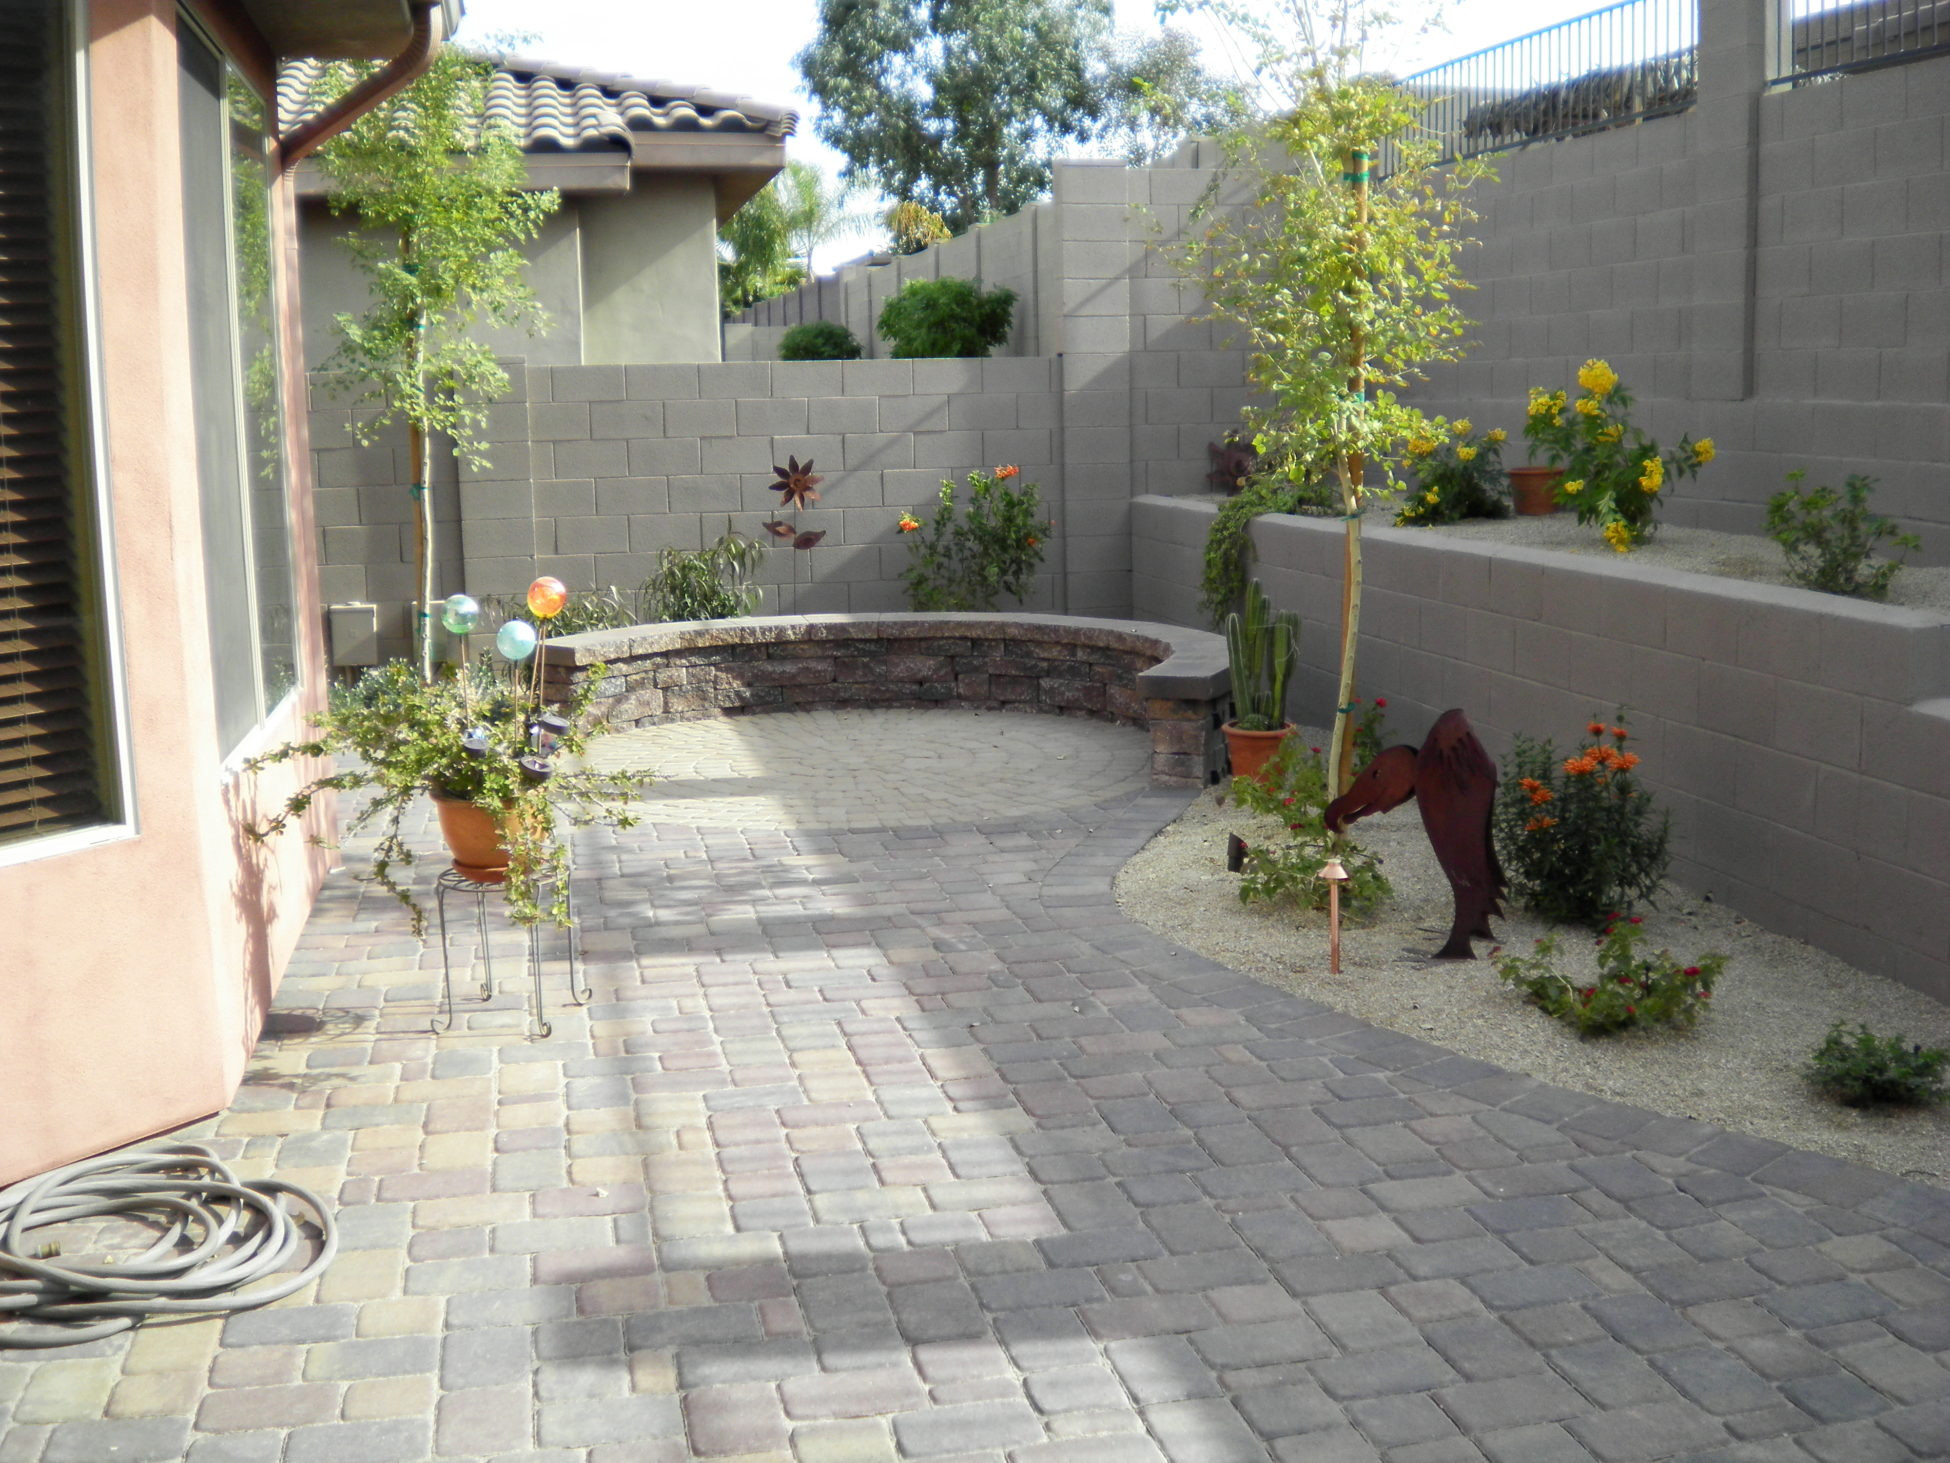 Backyard Ideas With Pavers
 Paver Designs and Paver Ideas for Your Backyard Patios